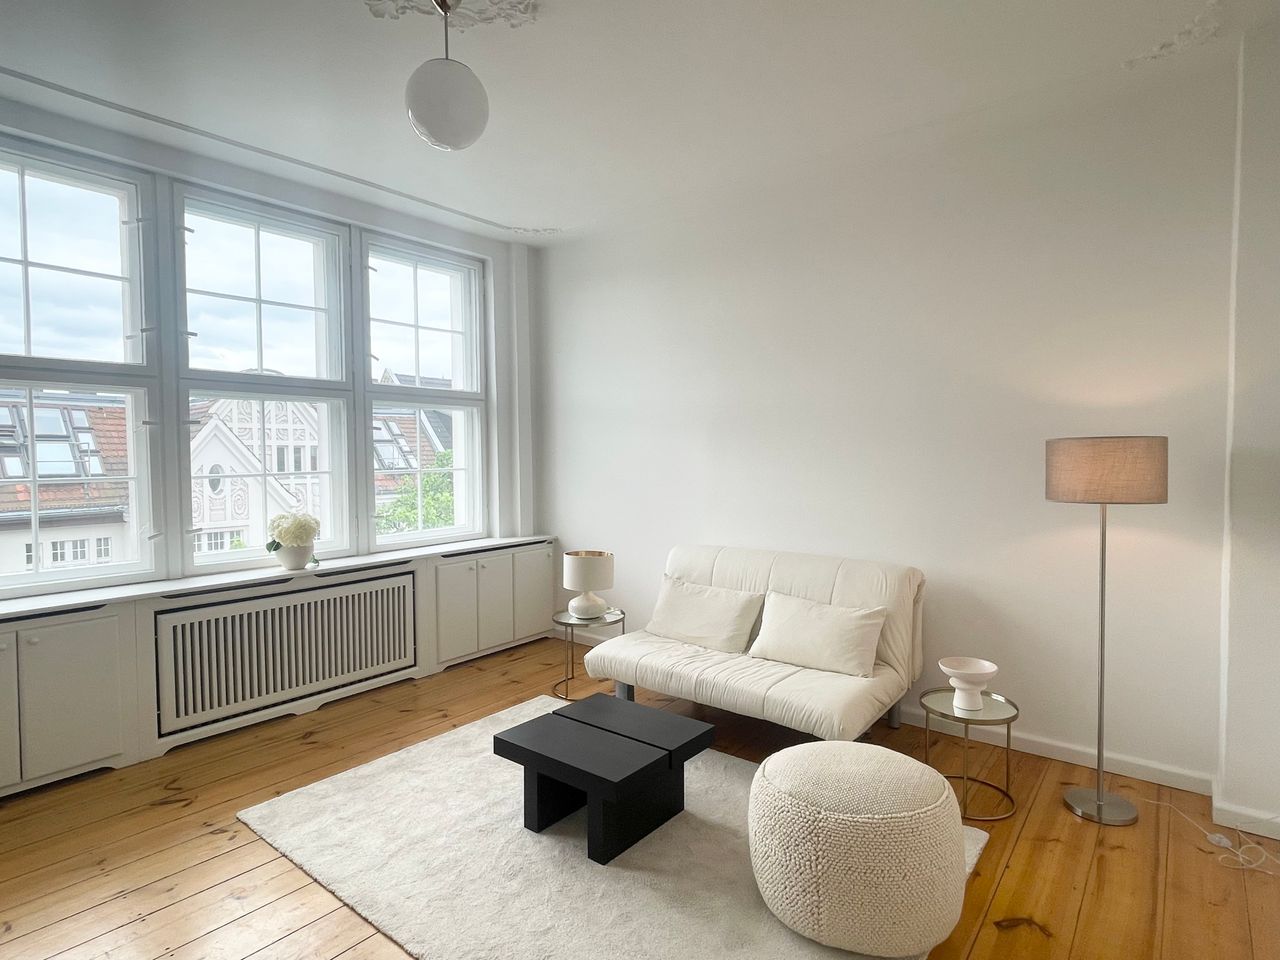 Stylish & light-flooded flat in quiet, central location of Friedenau